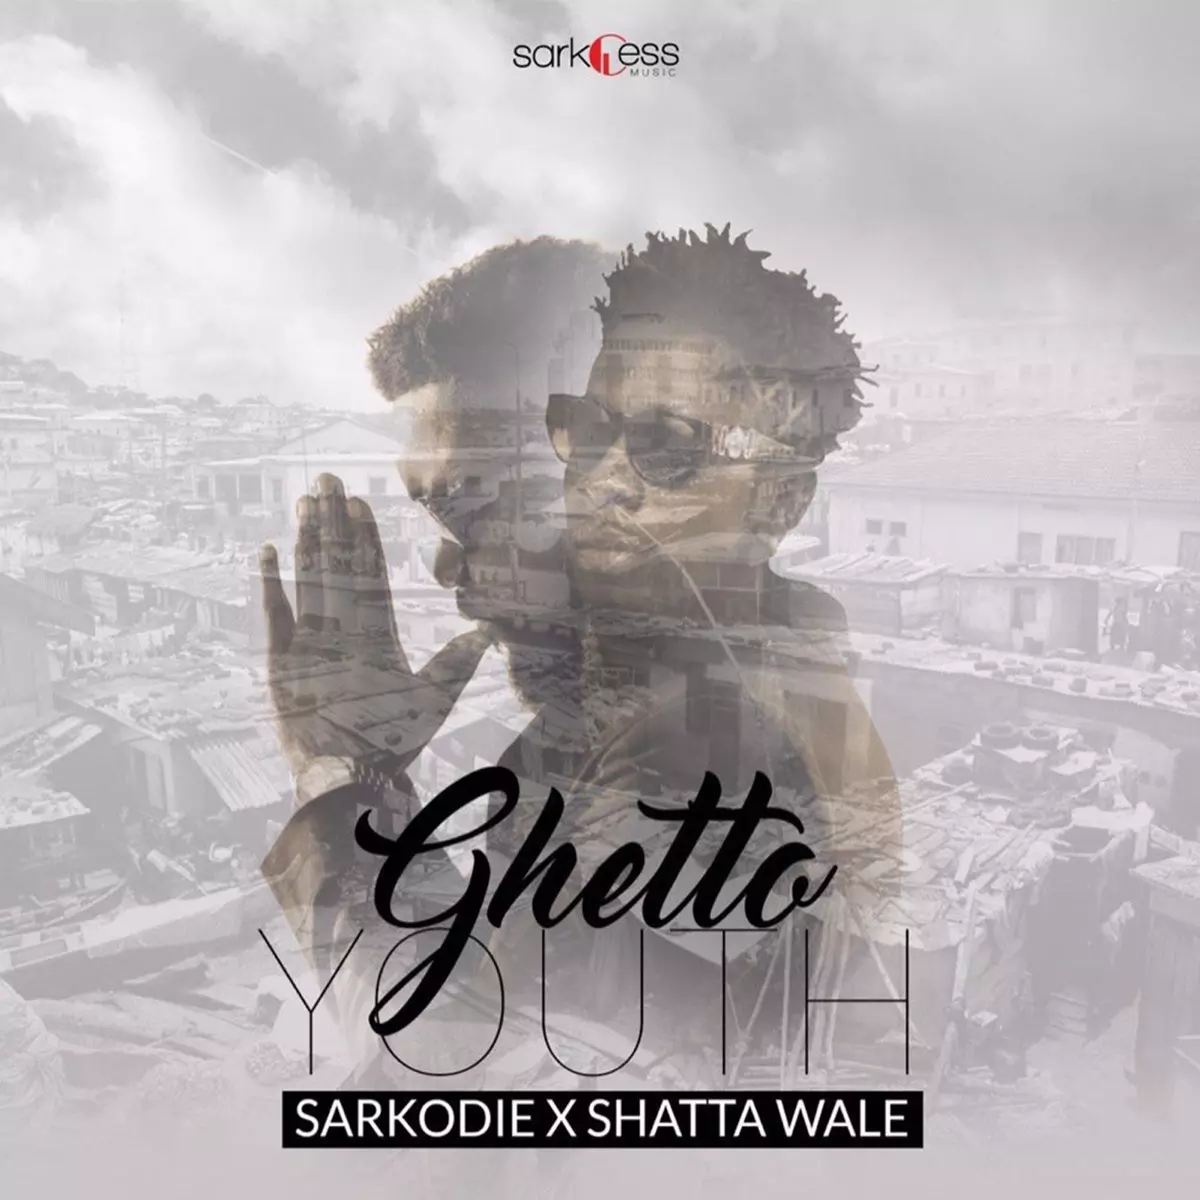 Ghetto Youth - Single by Sarkodie & Shatta Wale on Apple Music